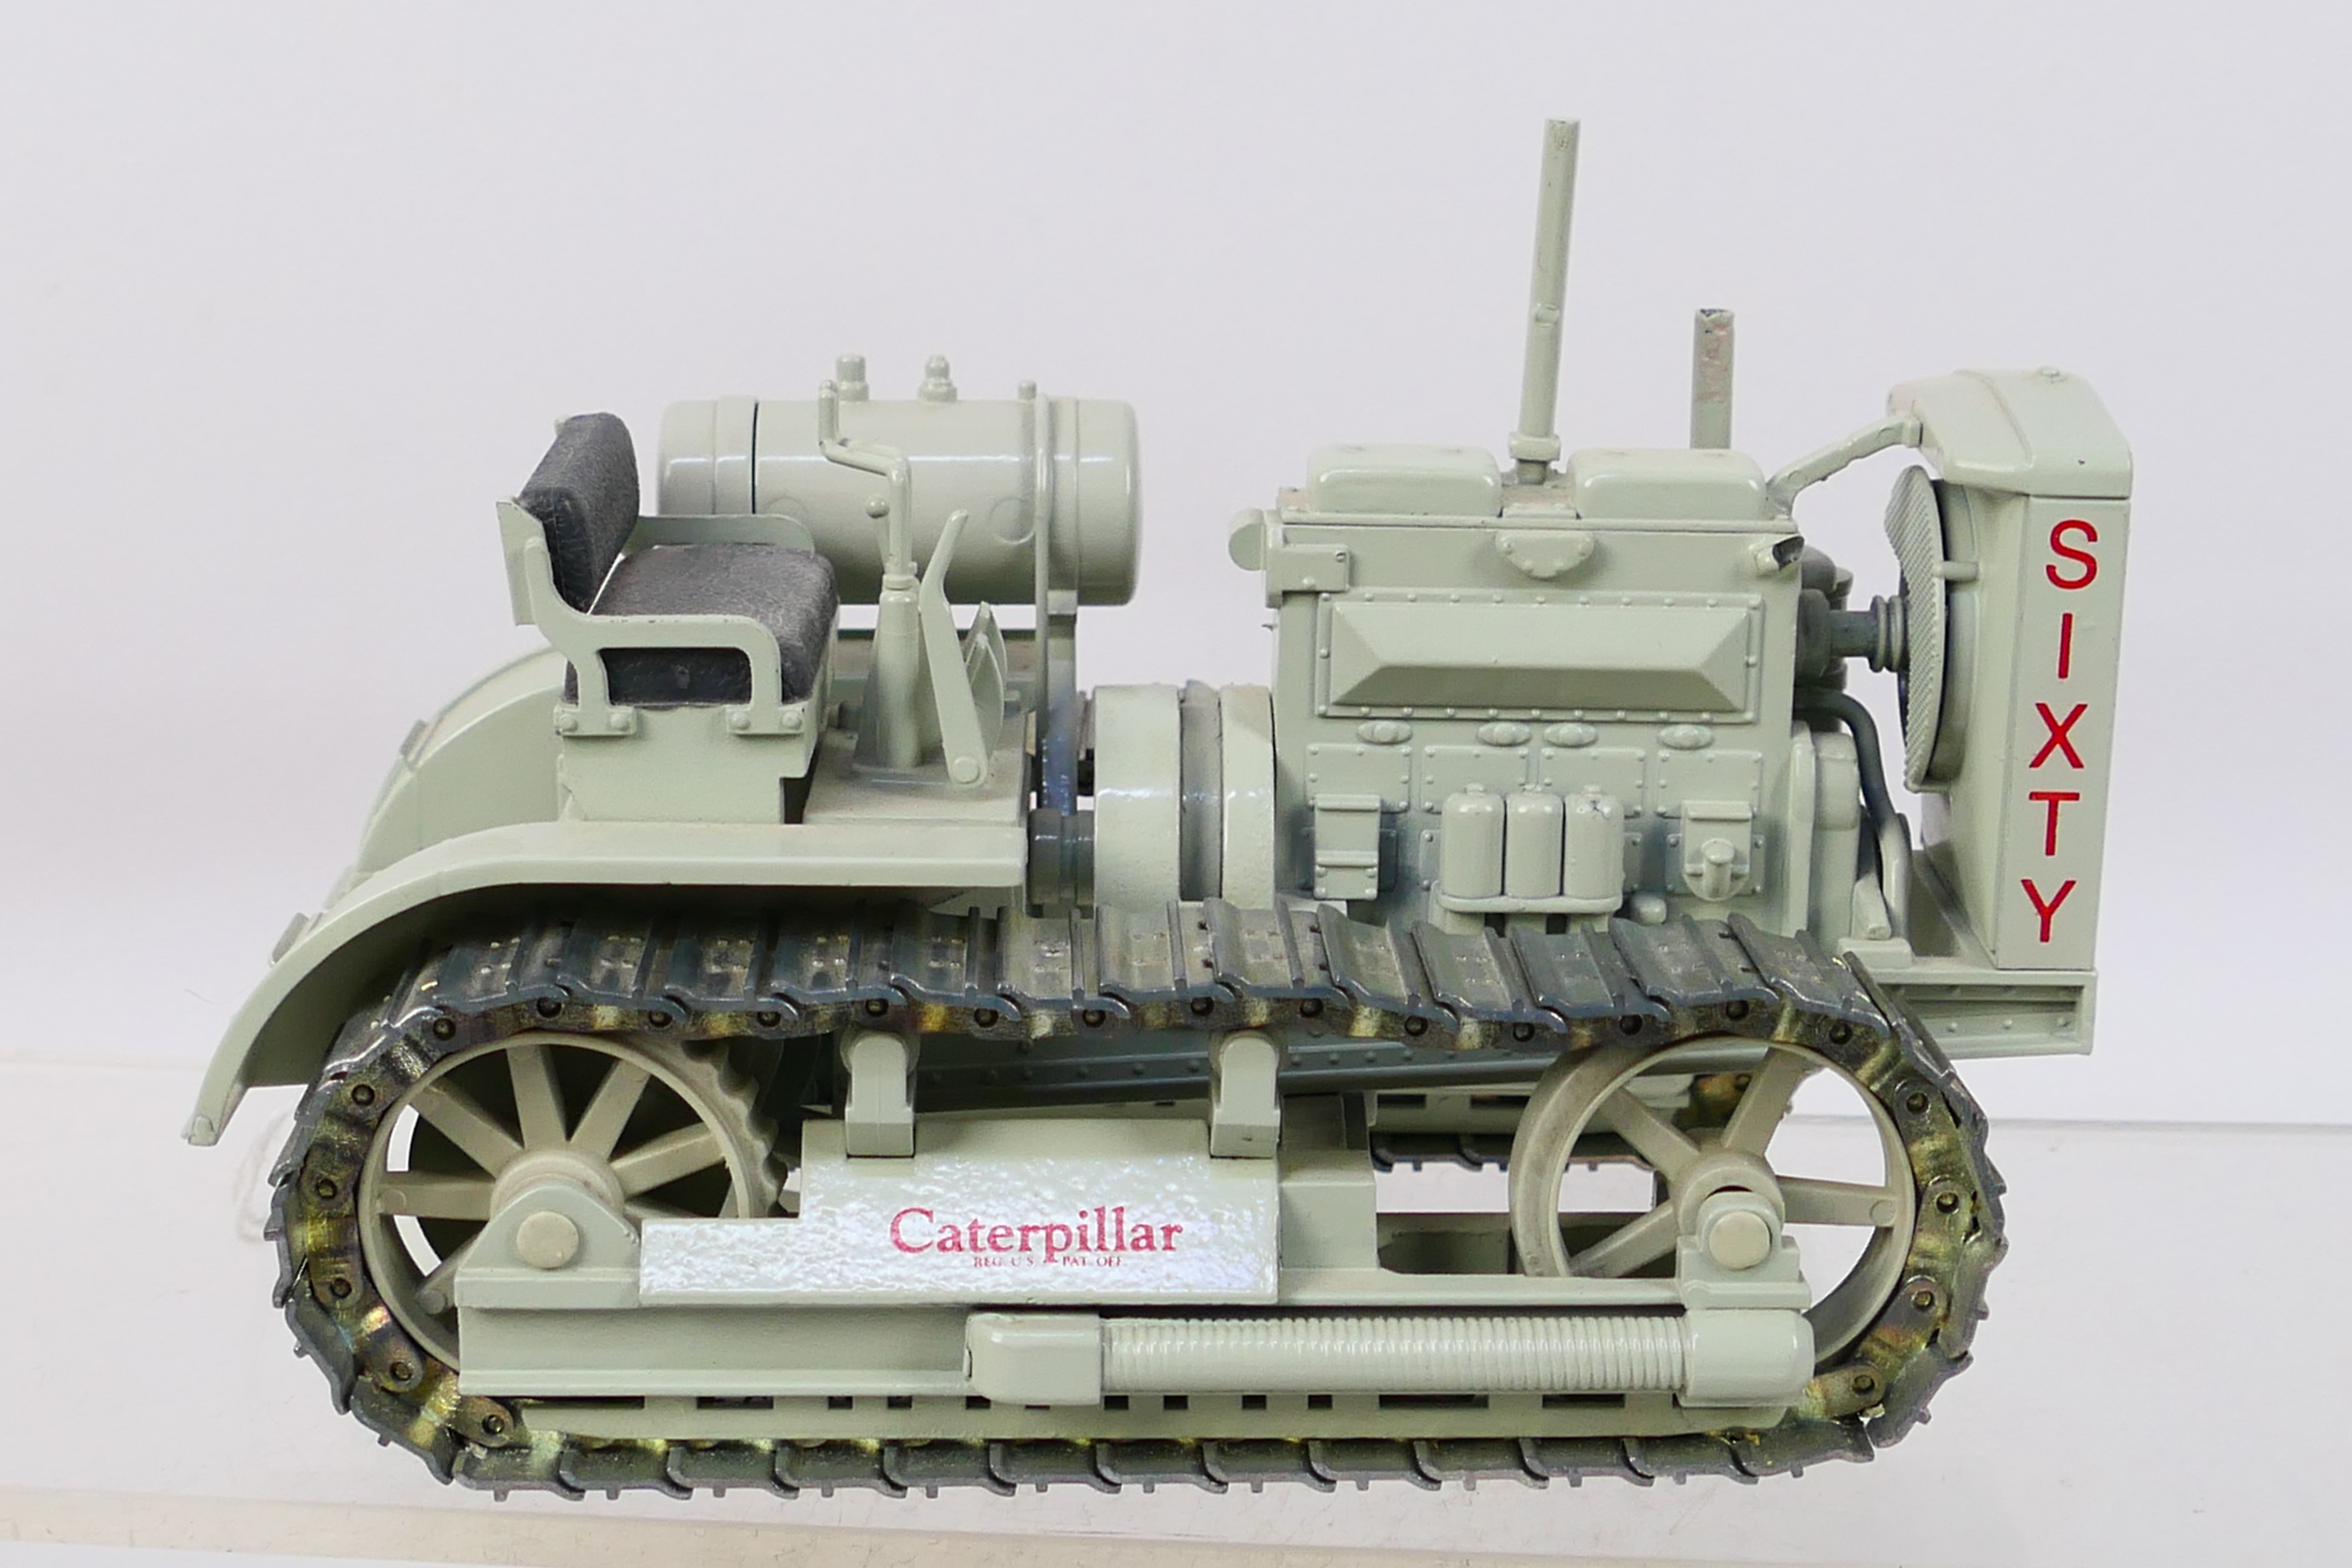 Conrad - A limited edition 1:25 scale 1931 Caterpillar Model Sixty Diesel crawler tractor released - Image 4 of 5